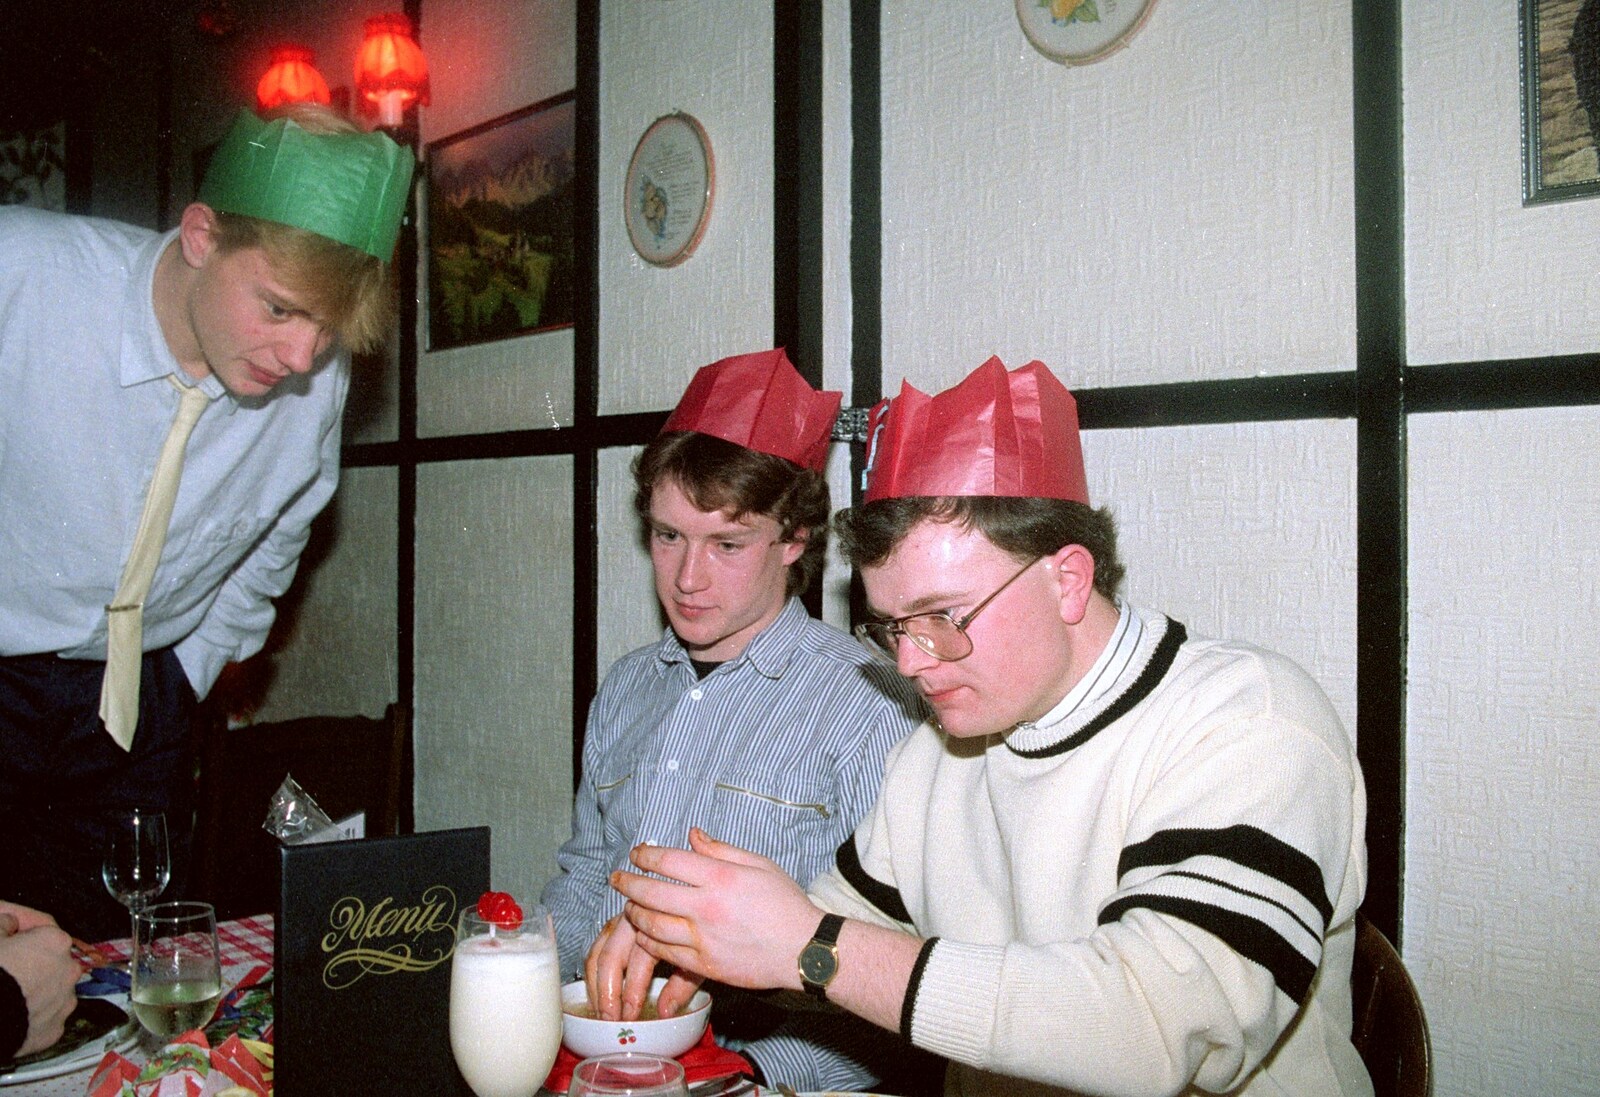 Hamish practices a bit of finger dipping from Hamish's 21st and Christmas, New Milton and Bransgore - 25th December 1987